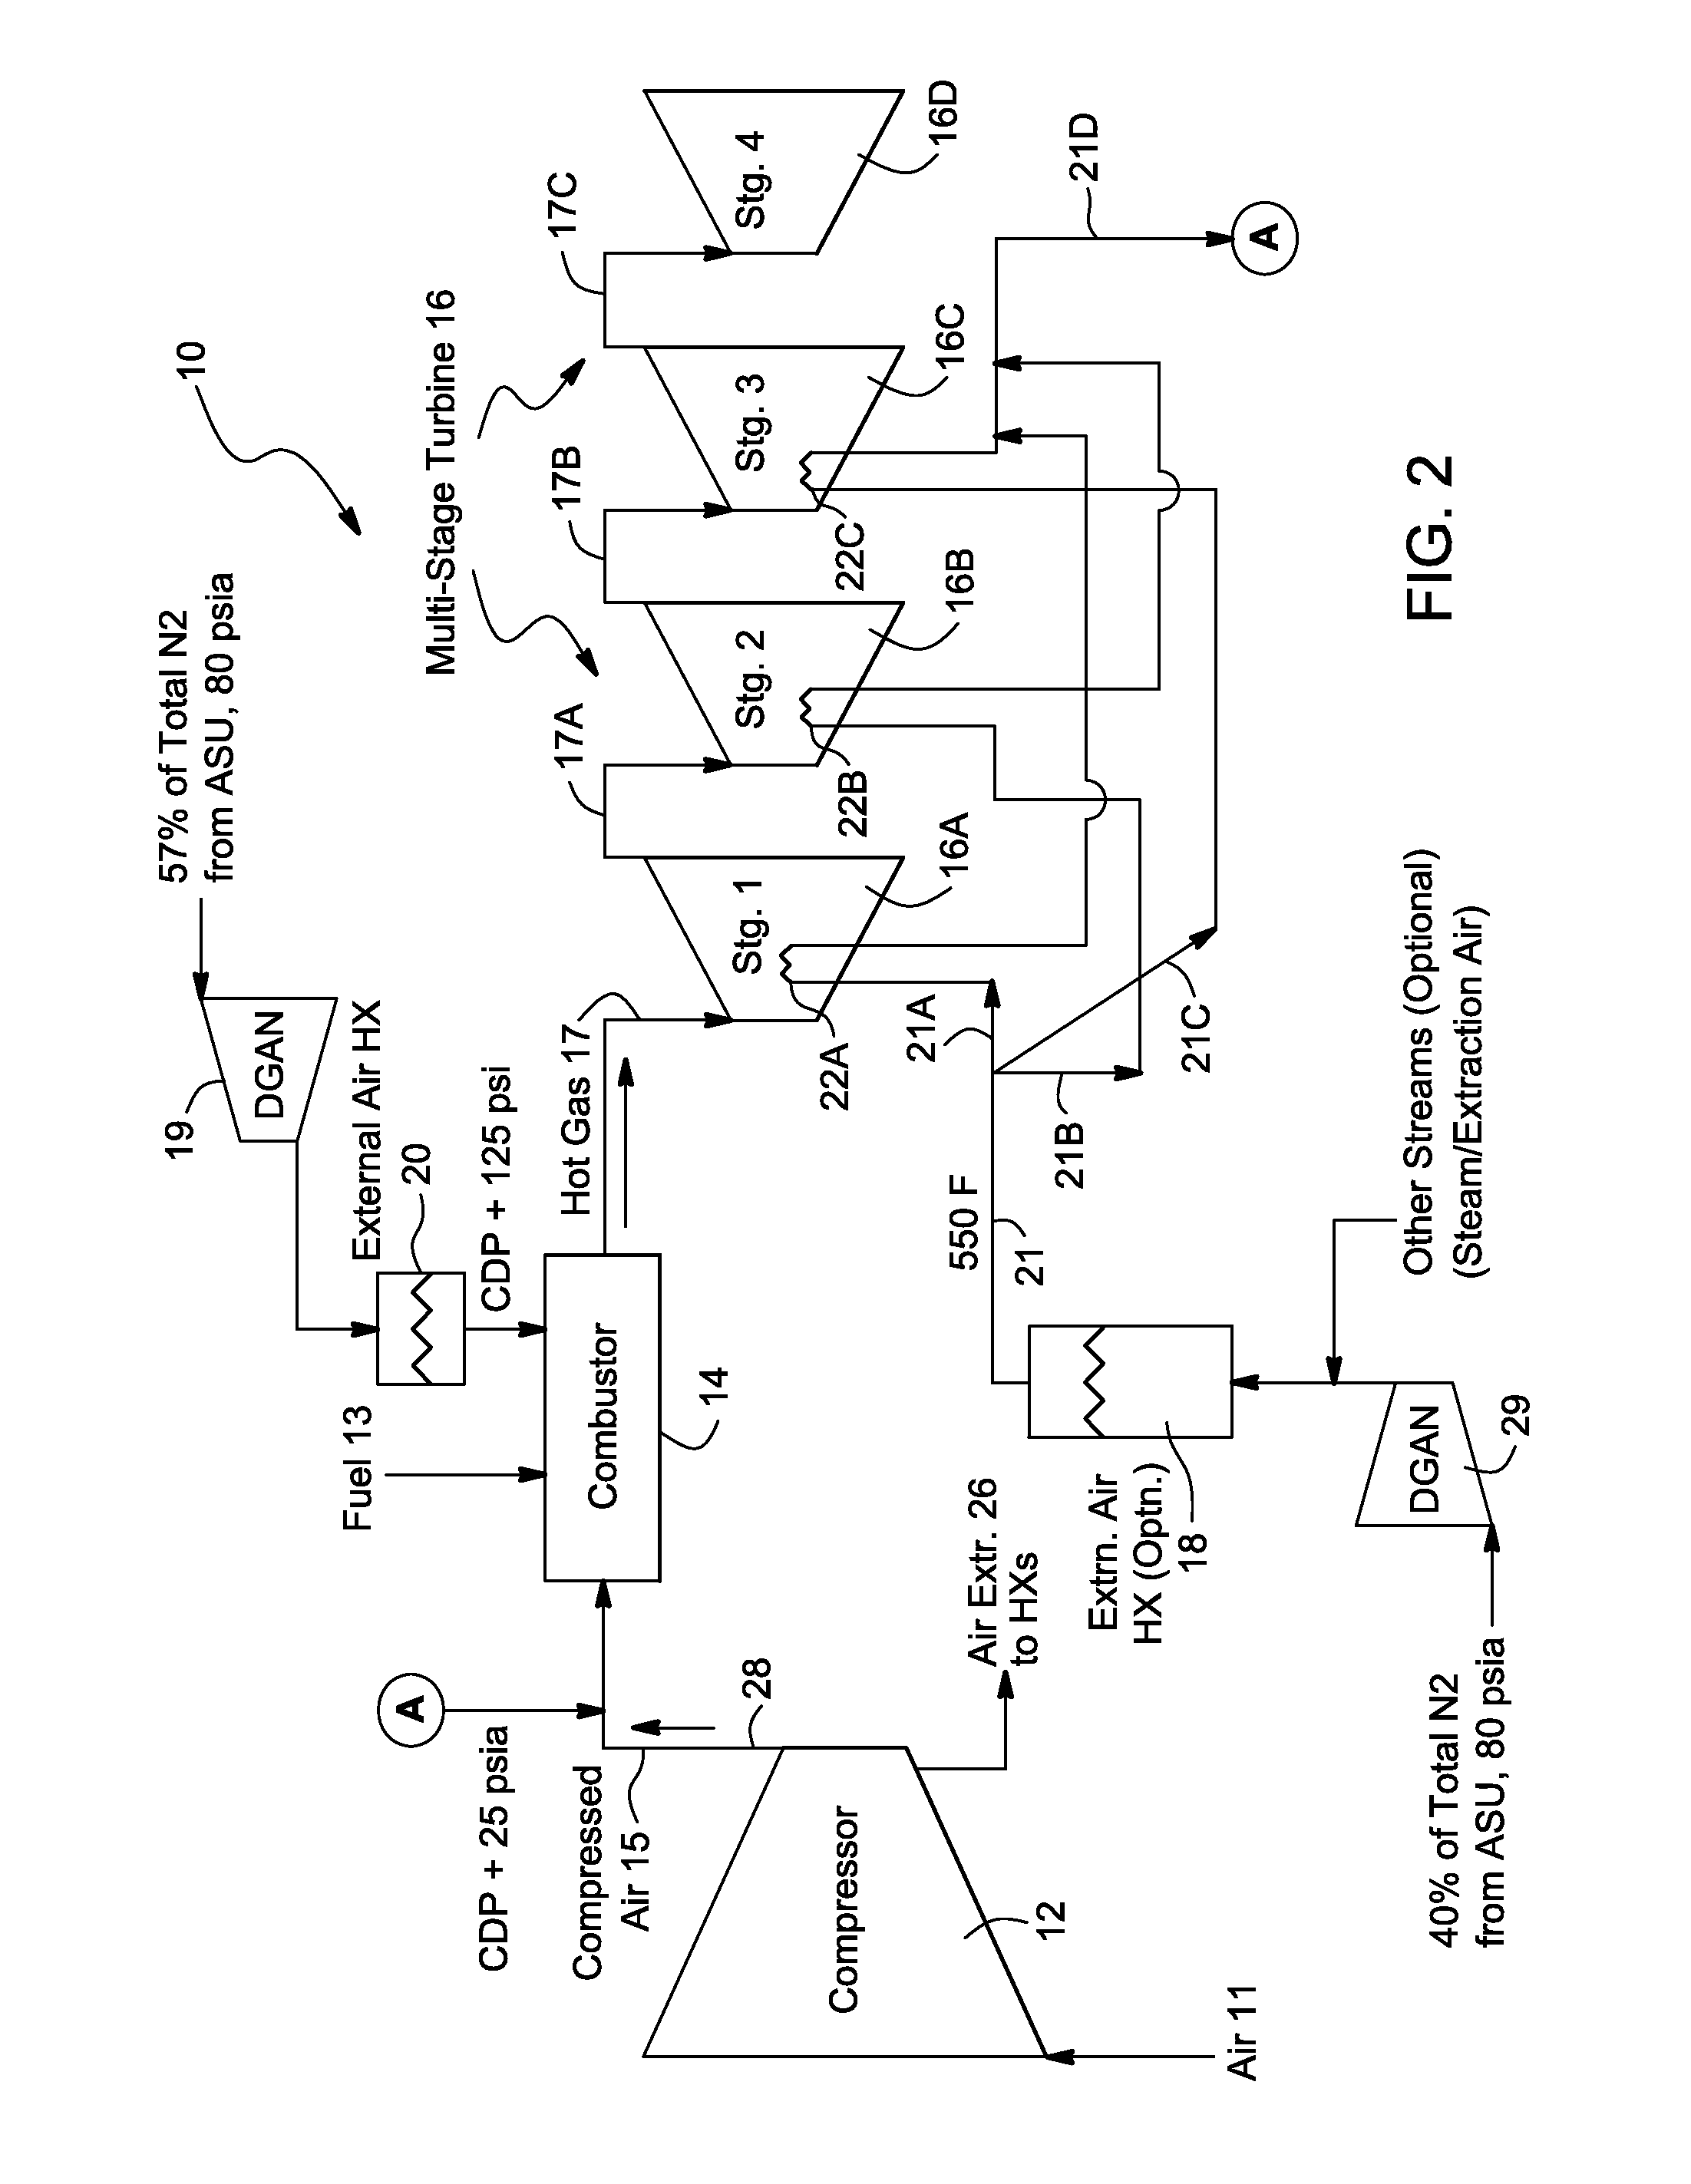 Method of using external fluid for cooling high temperature components of gas turbine for a process power plant